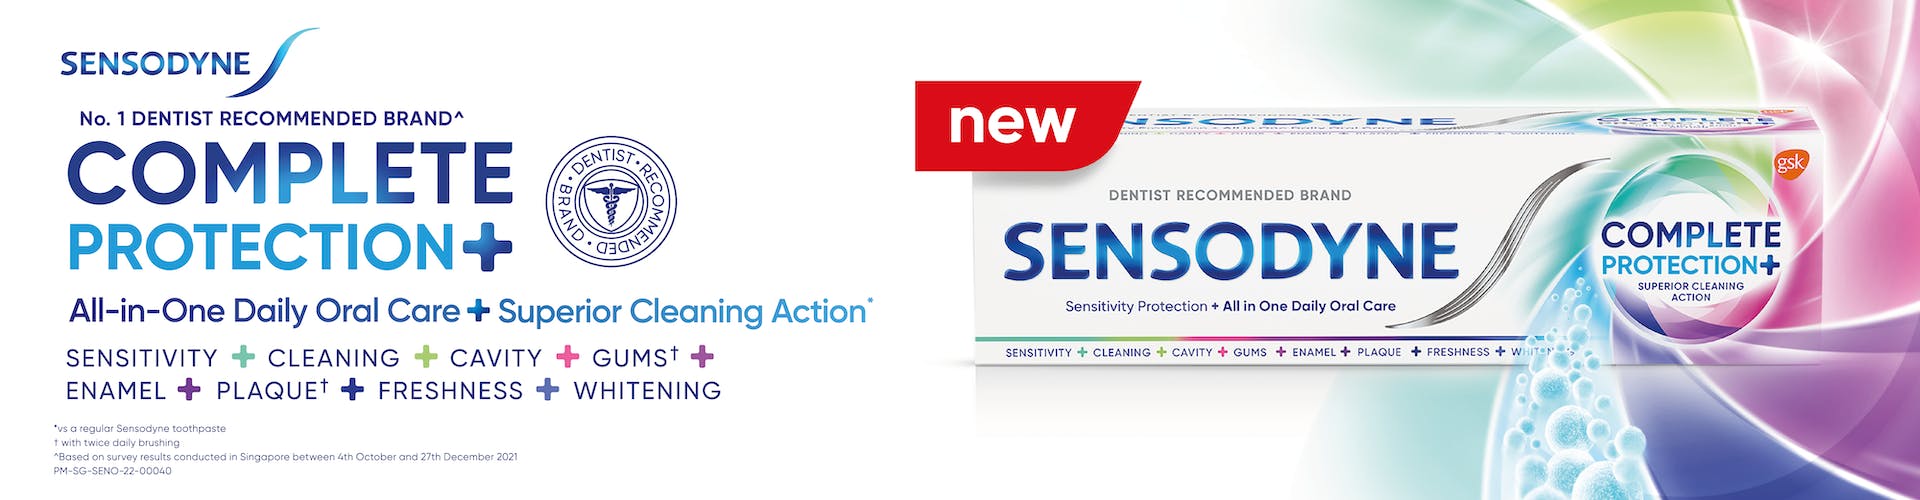 GSK Sensodyne Olympia Complete Protection banner